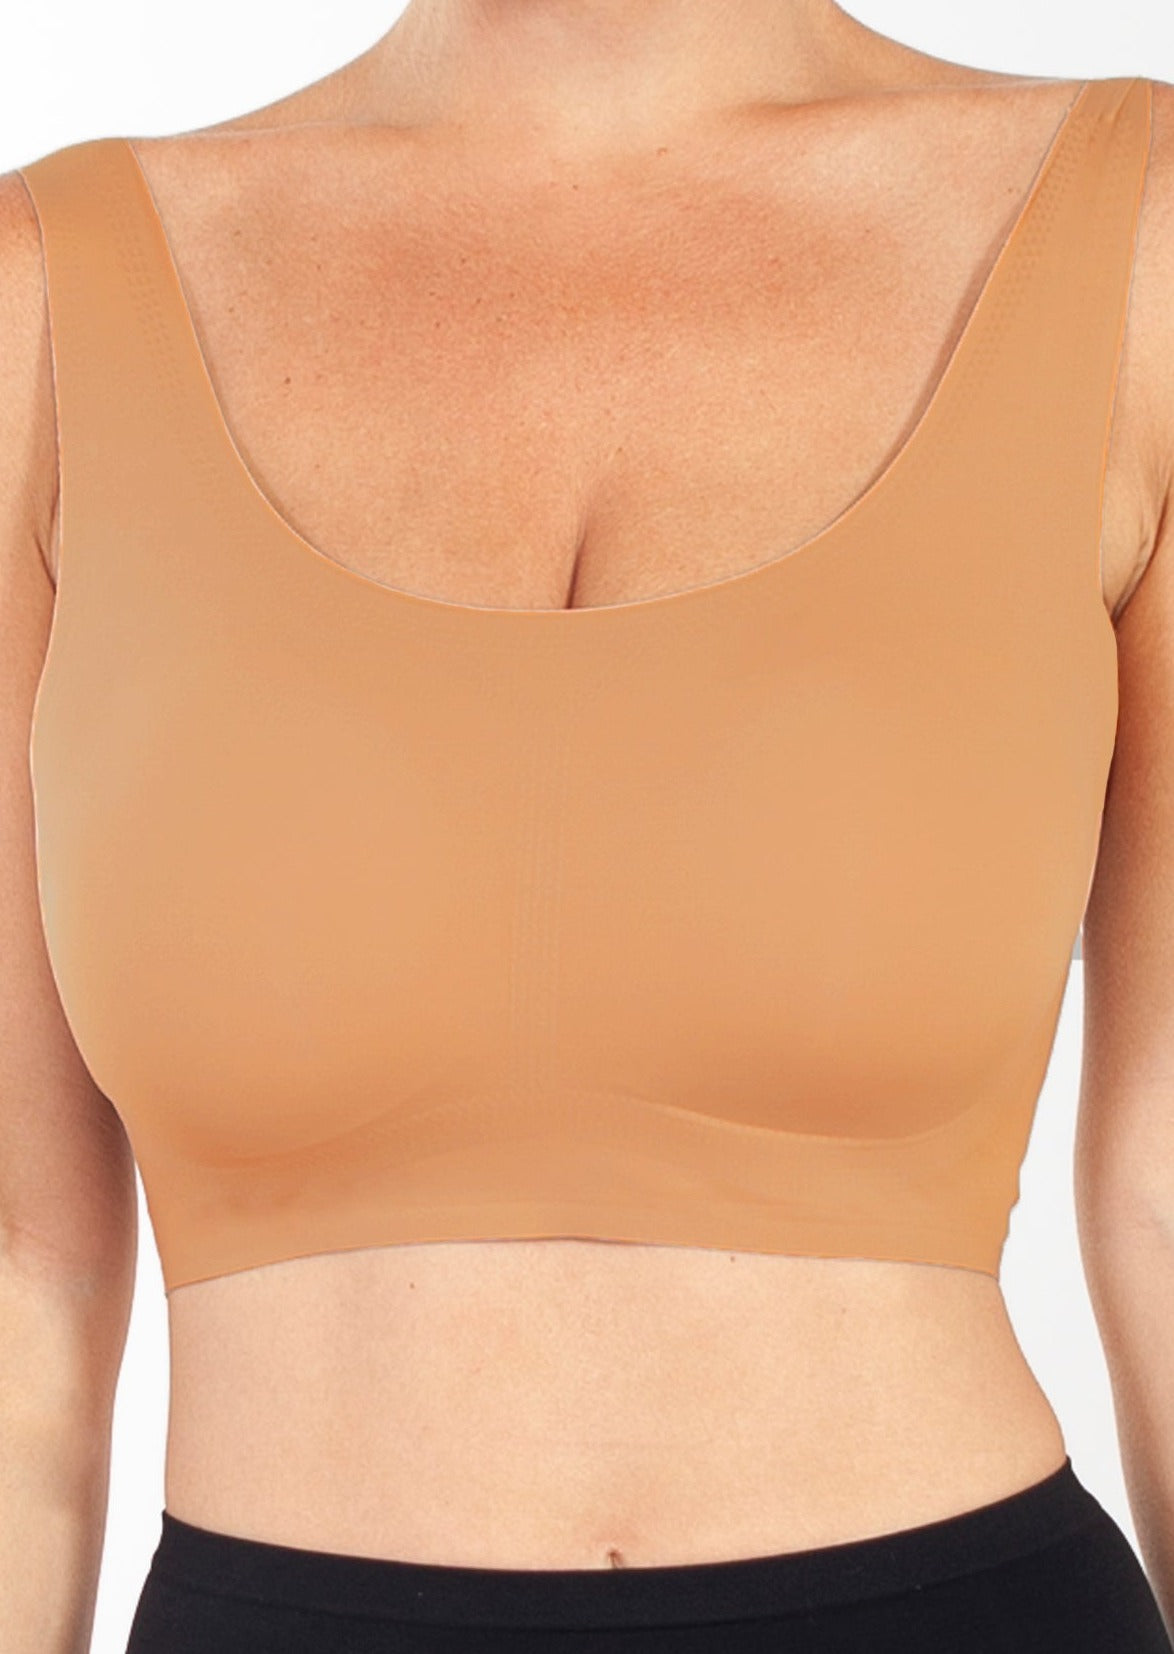 RXIRUCGD Self Expressions Strap Bra, Full-Coverage Extreme Lift